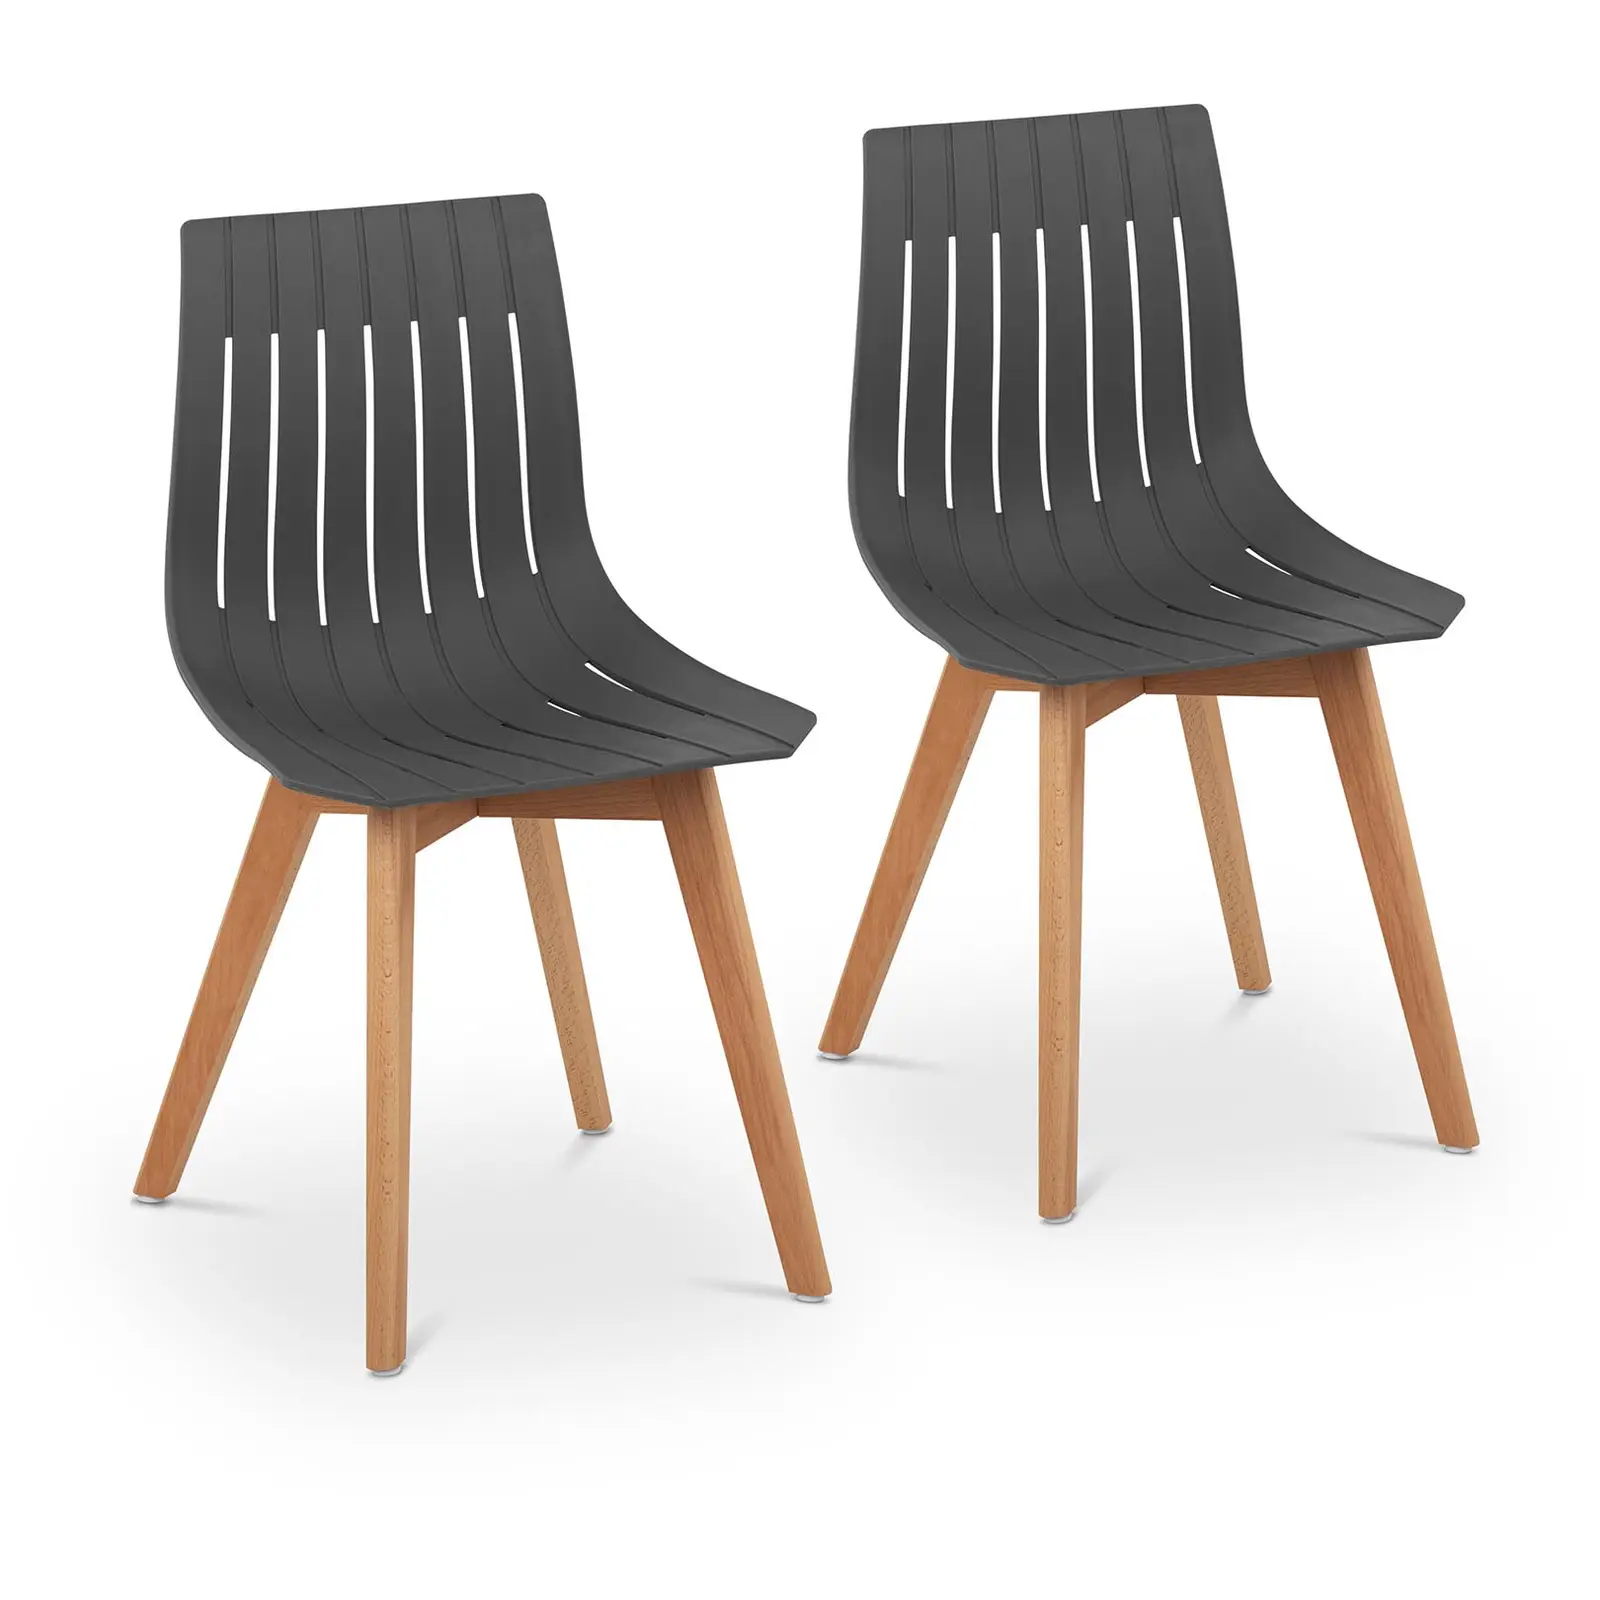 Chair - set of 2 - up to 150 kg - seat 50 x 47 cm - grey